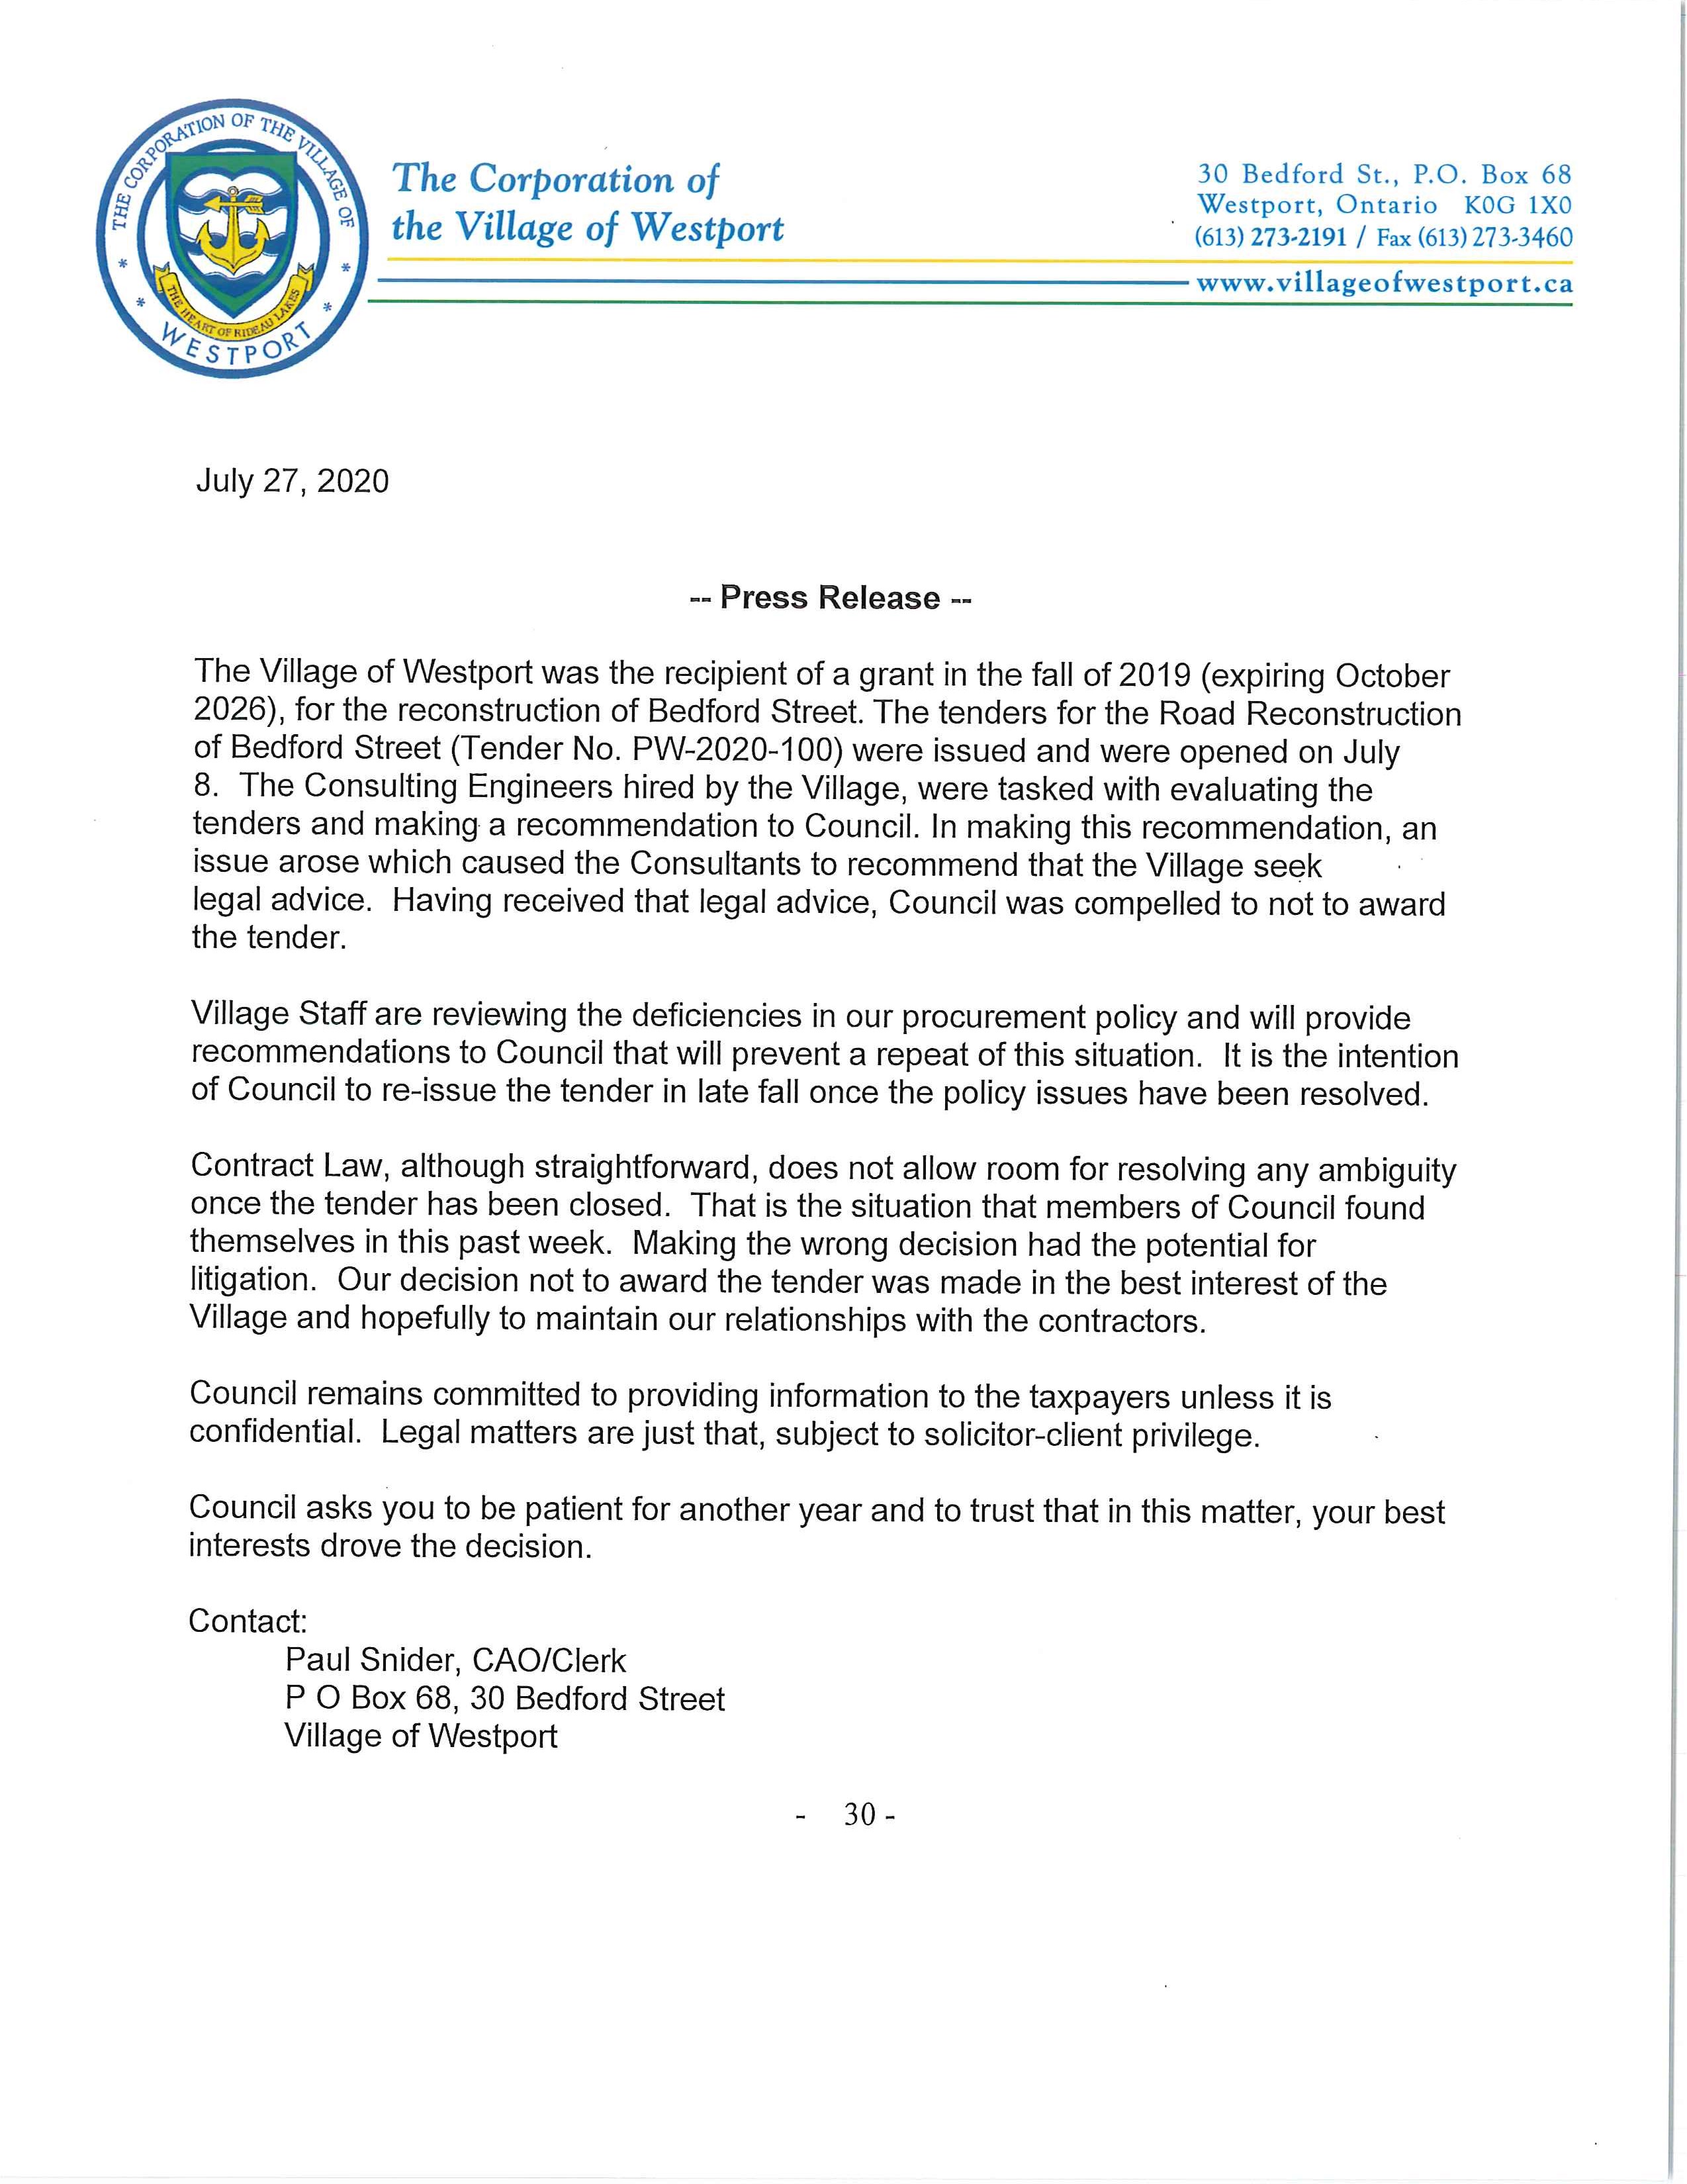 Press Release re:  Bedford Street Reconstruction